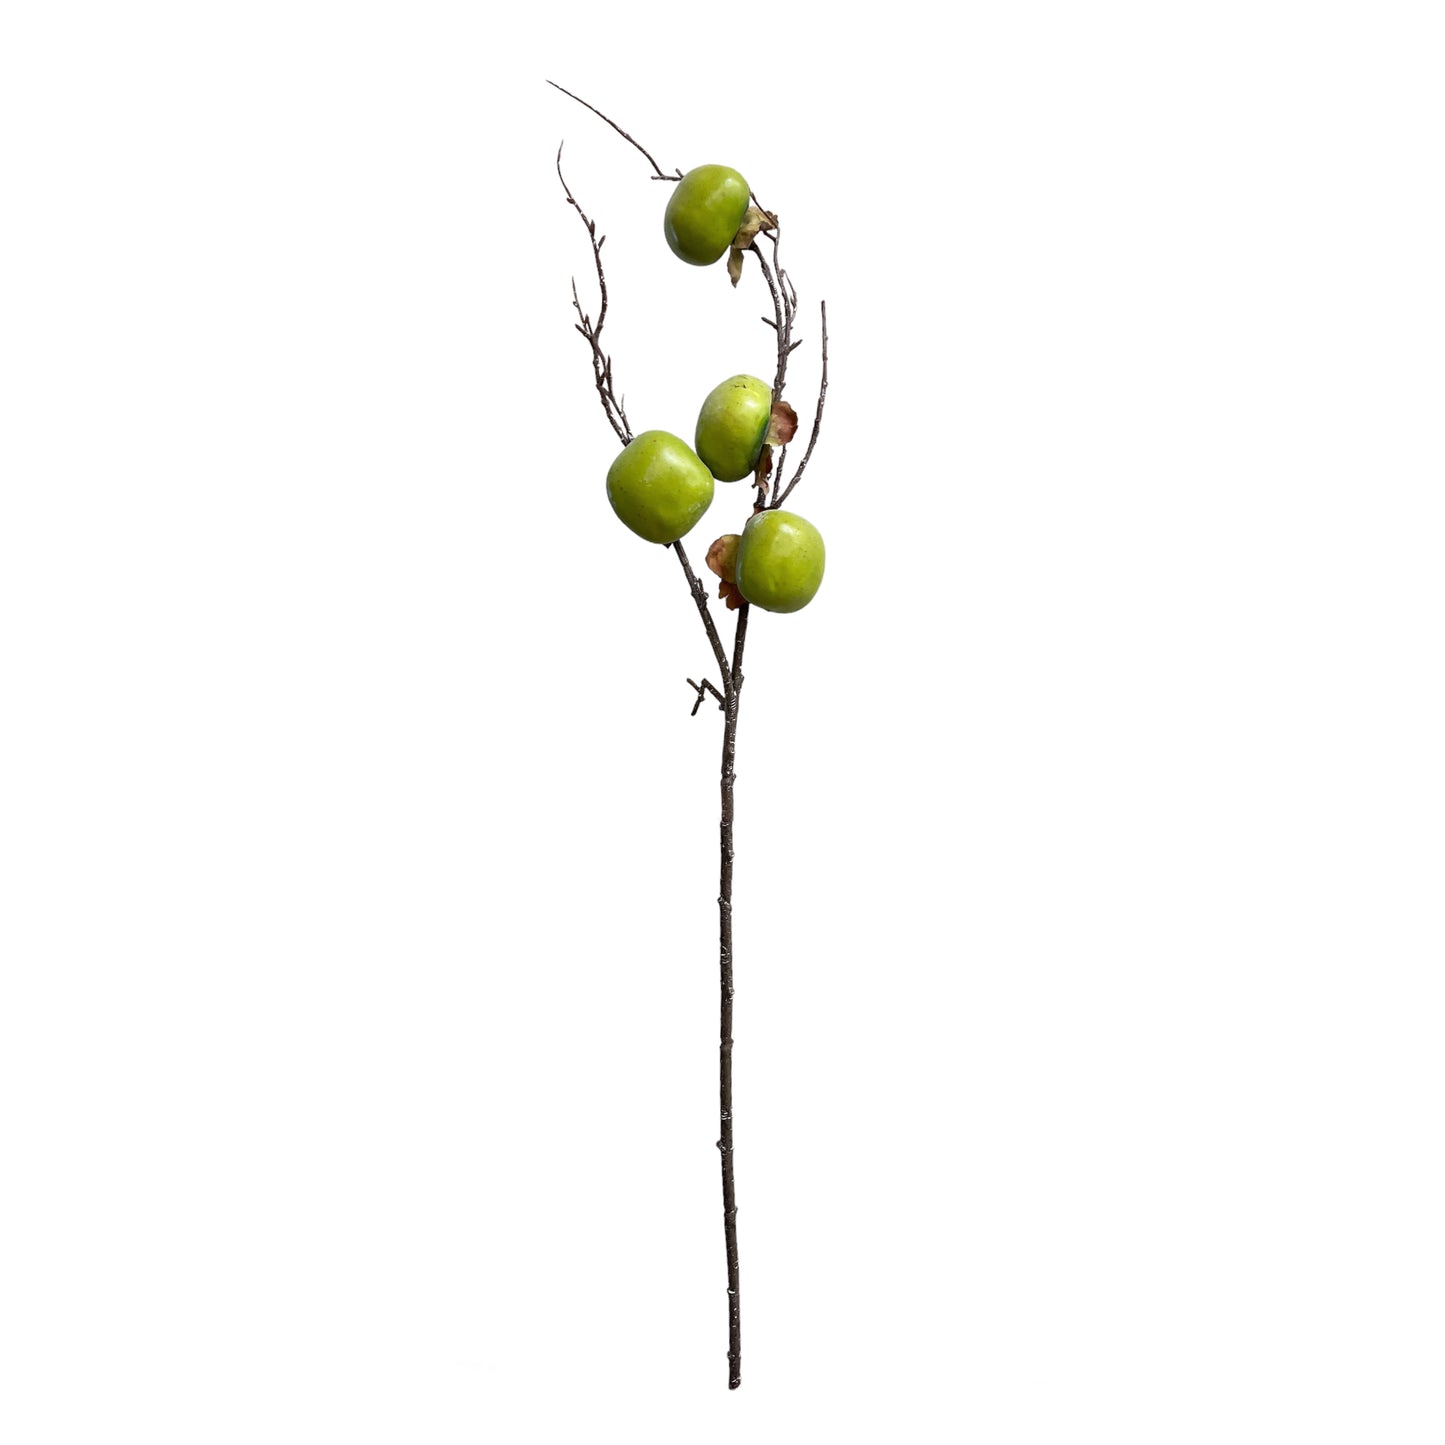 Set of 2 Artificial Persimmon Branches - Lifelike Decorative Stems, 30 inches Tall